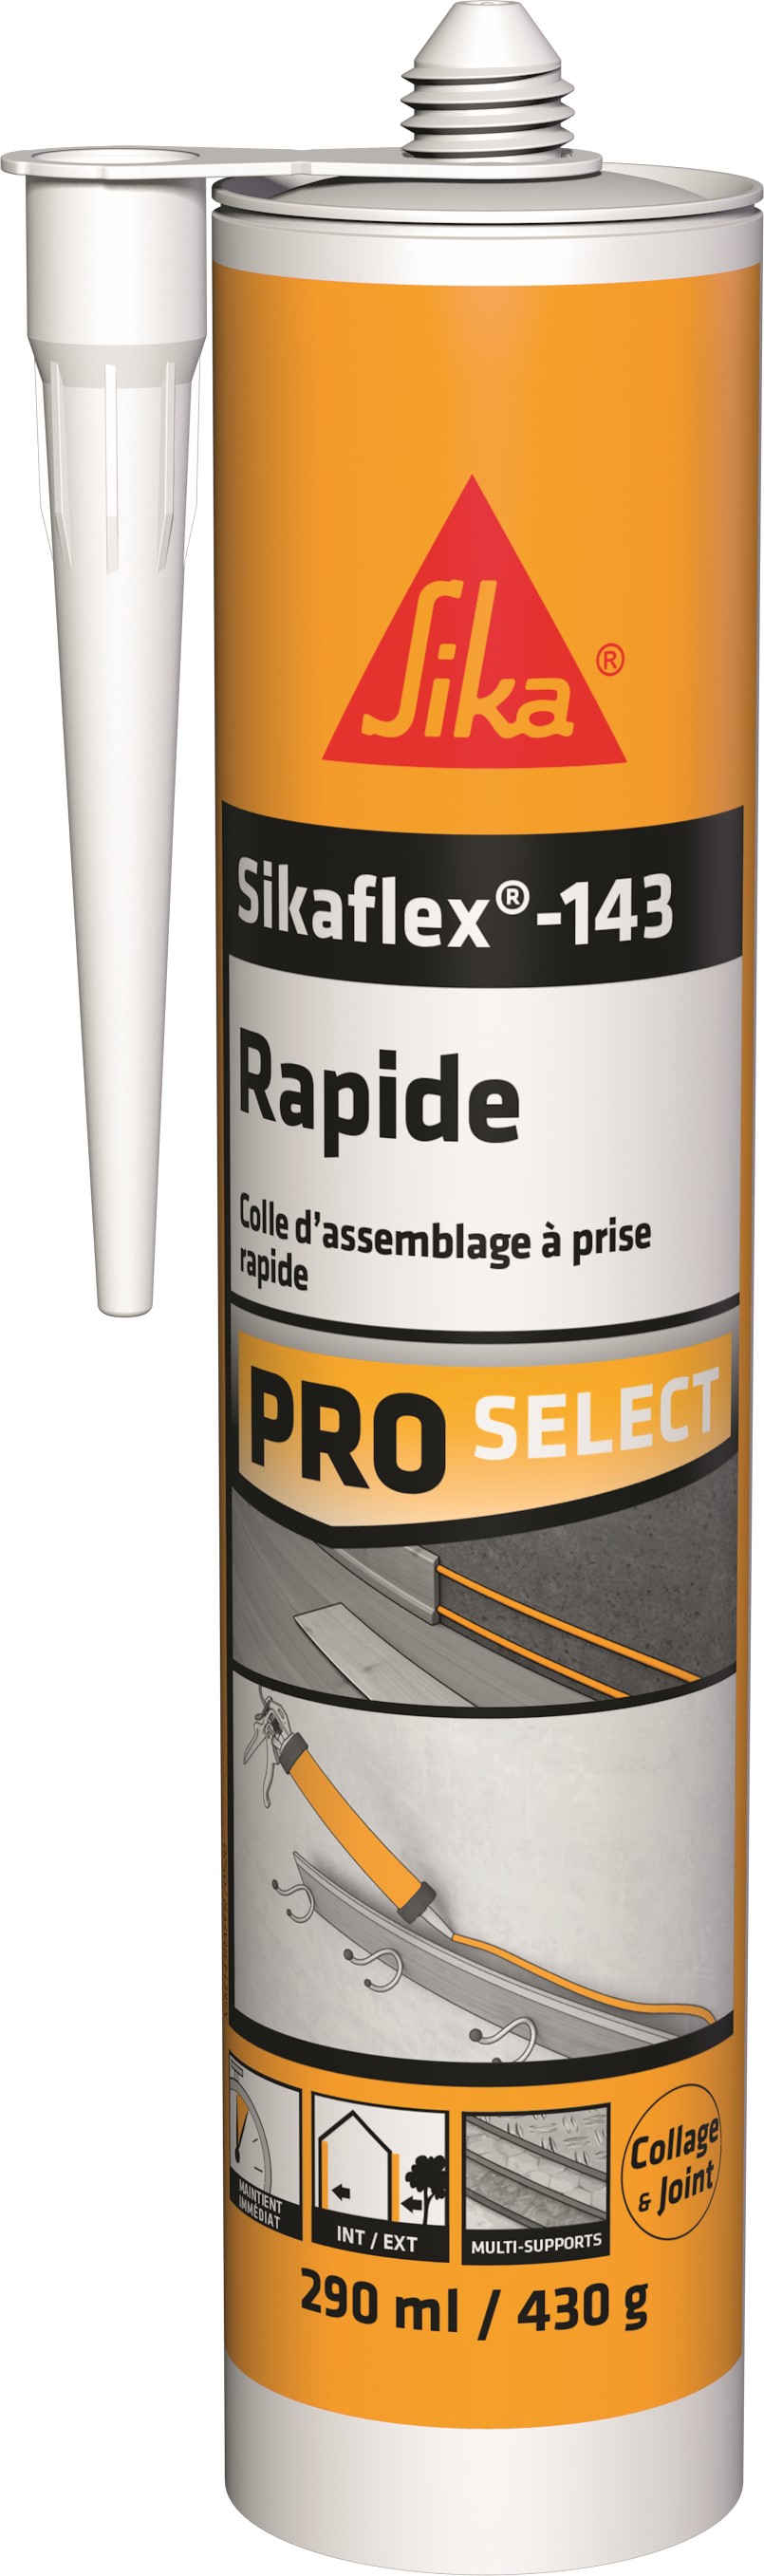 Colle Rapide Sikaflex®-143 Blanc 430gr - SIKA